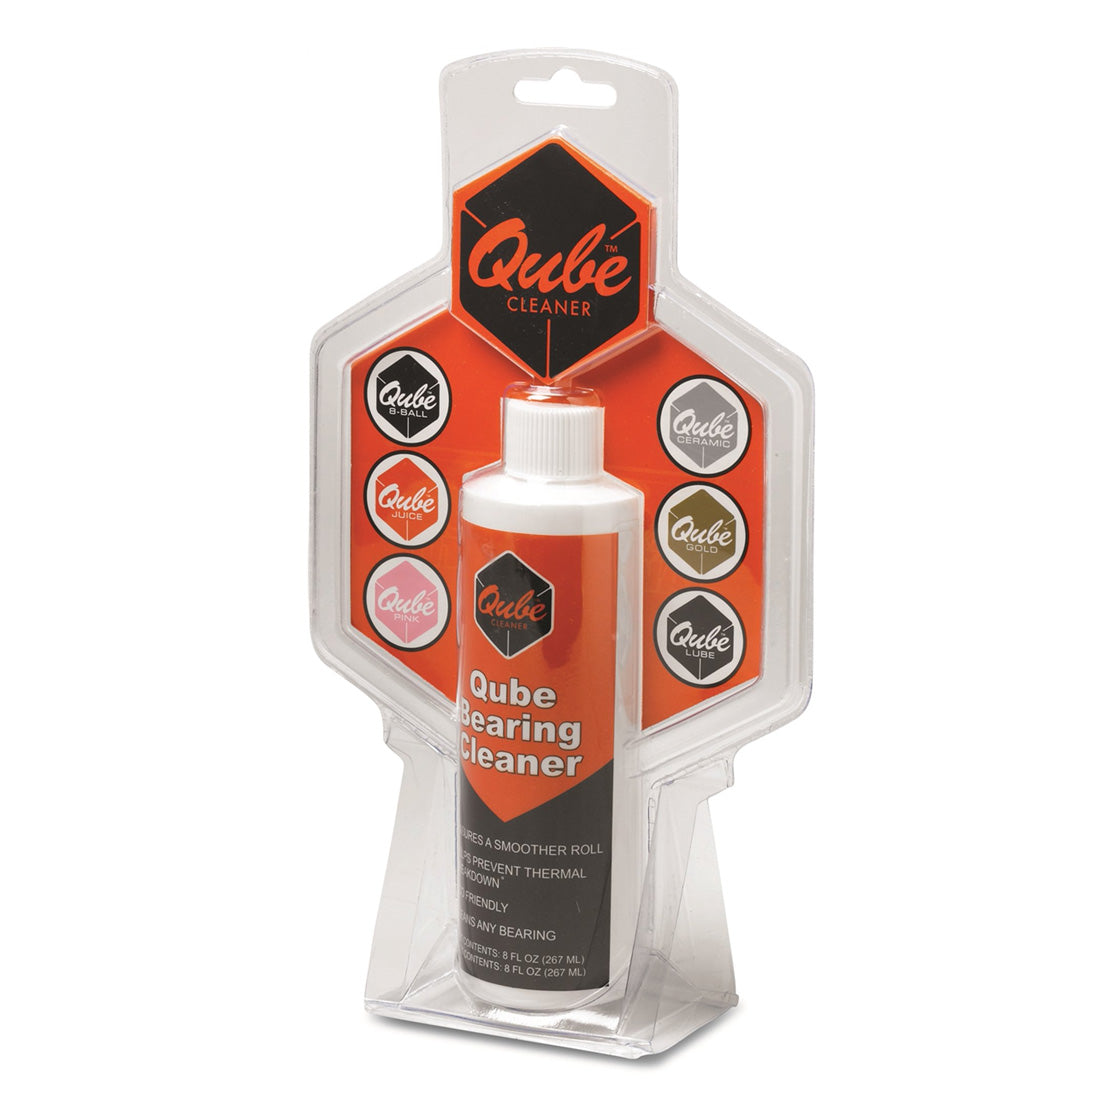 Qube Bearing Cleaning Solution Roller Skate Hardware and Parts